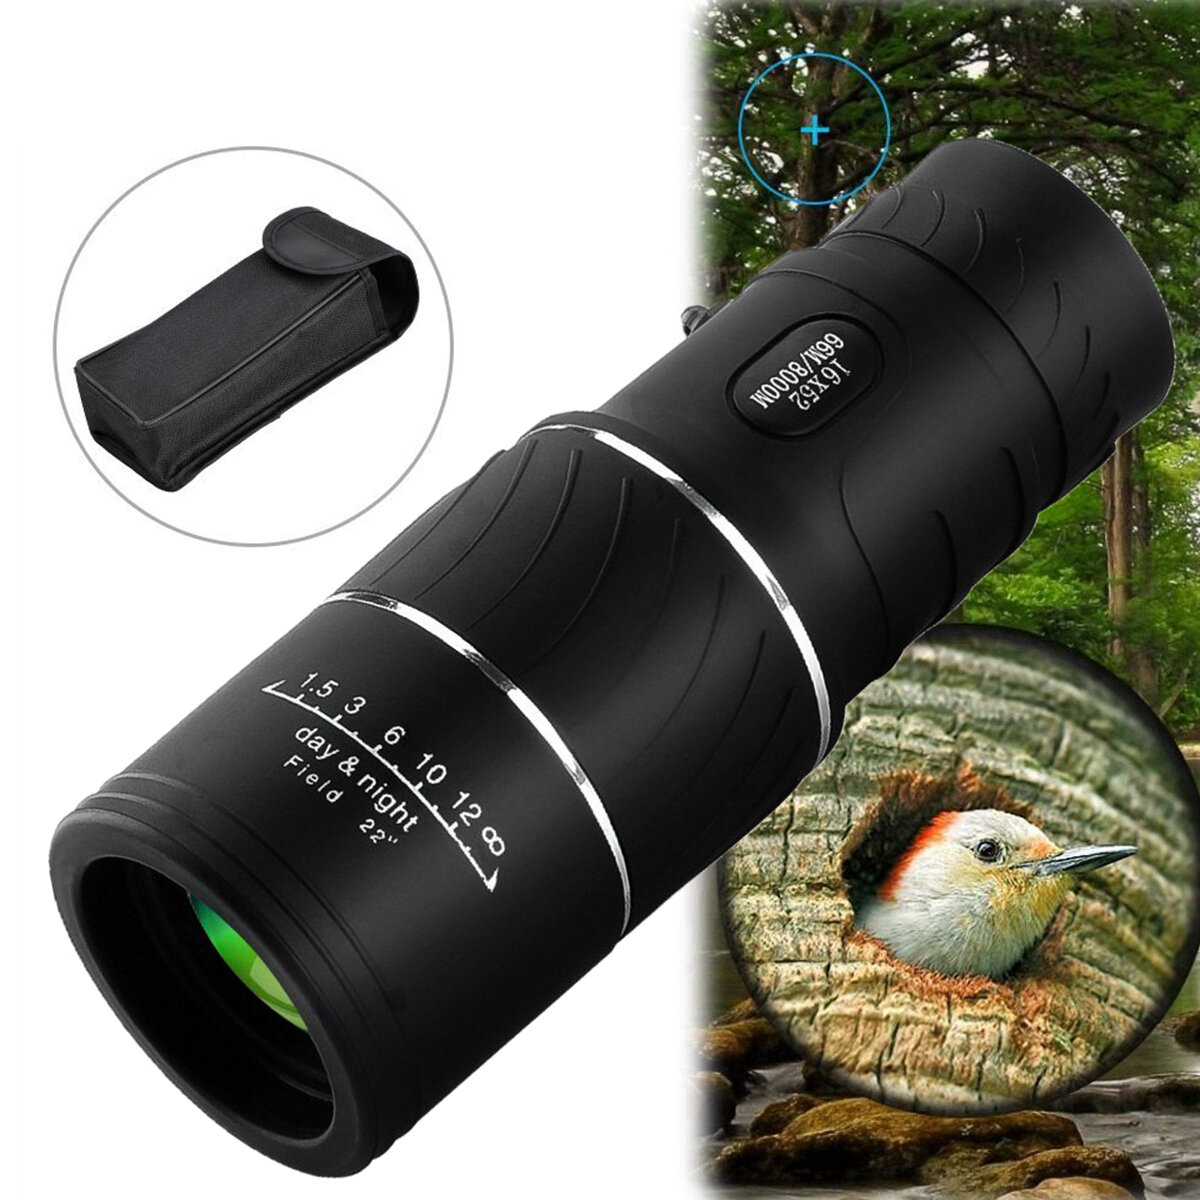 ARCHEER 16x52 Monocular Dual Focus Optics Zoom Telescope Day & Night Vision For Birds/ Hunting/ Camping/ Tourism